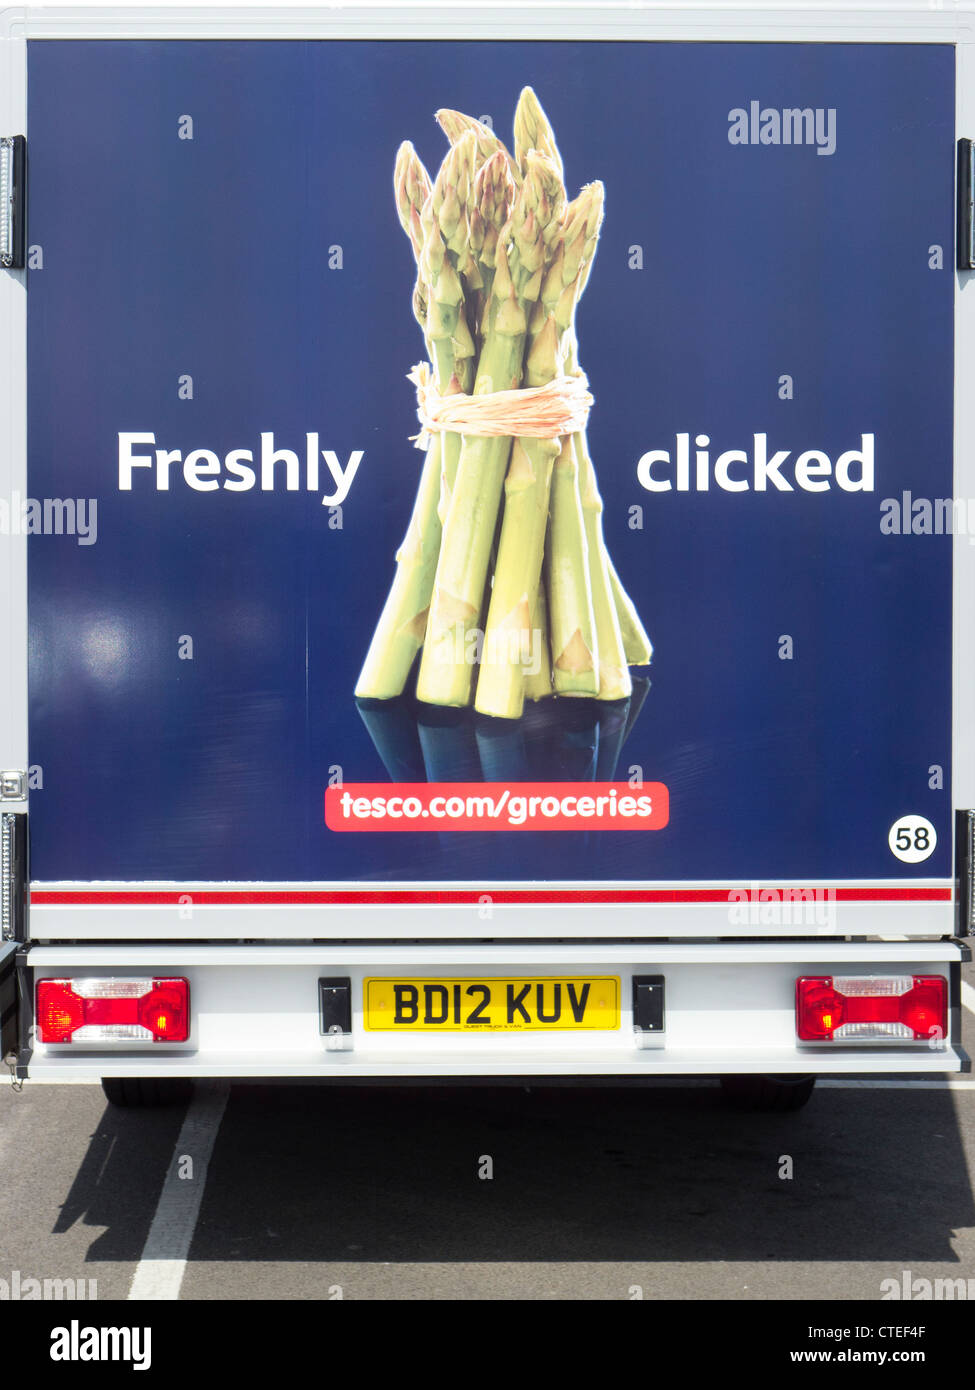 Tesco grocery delivery truck. Stock Photo